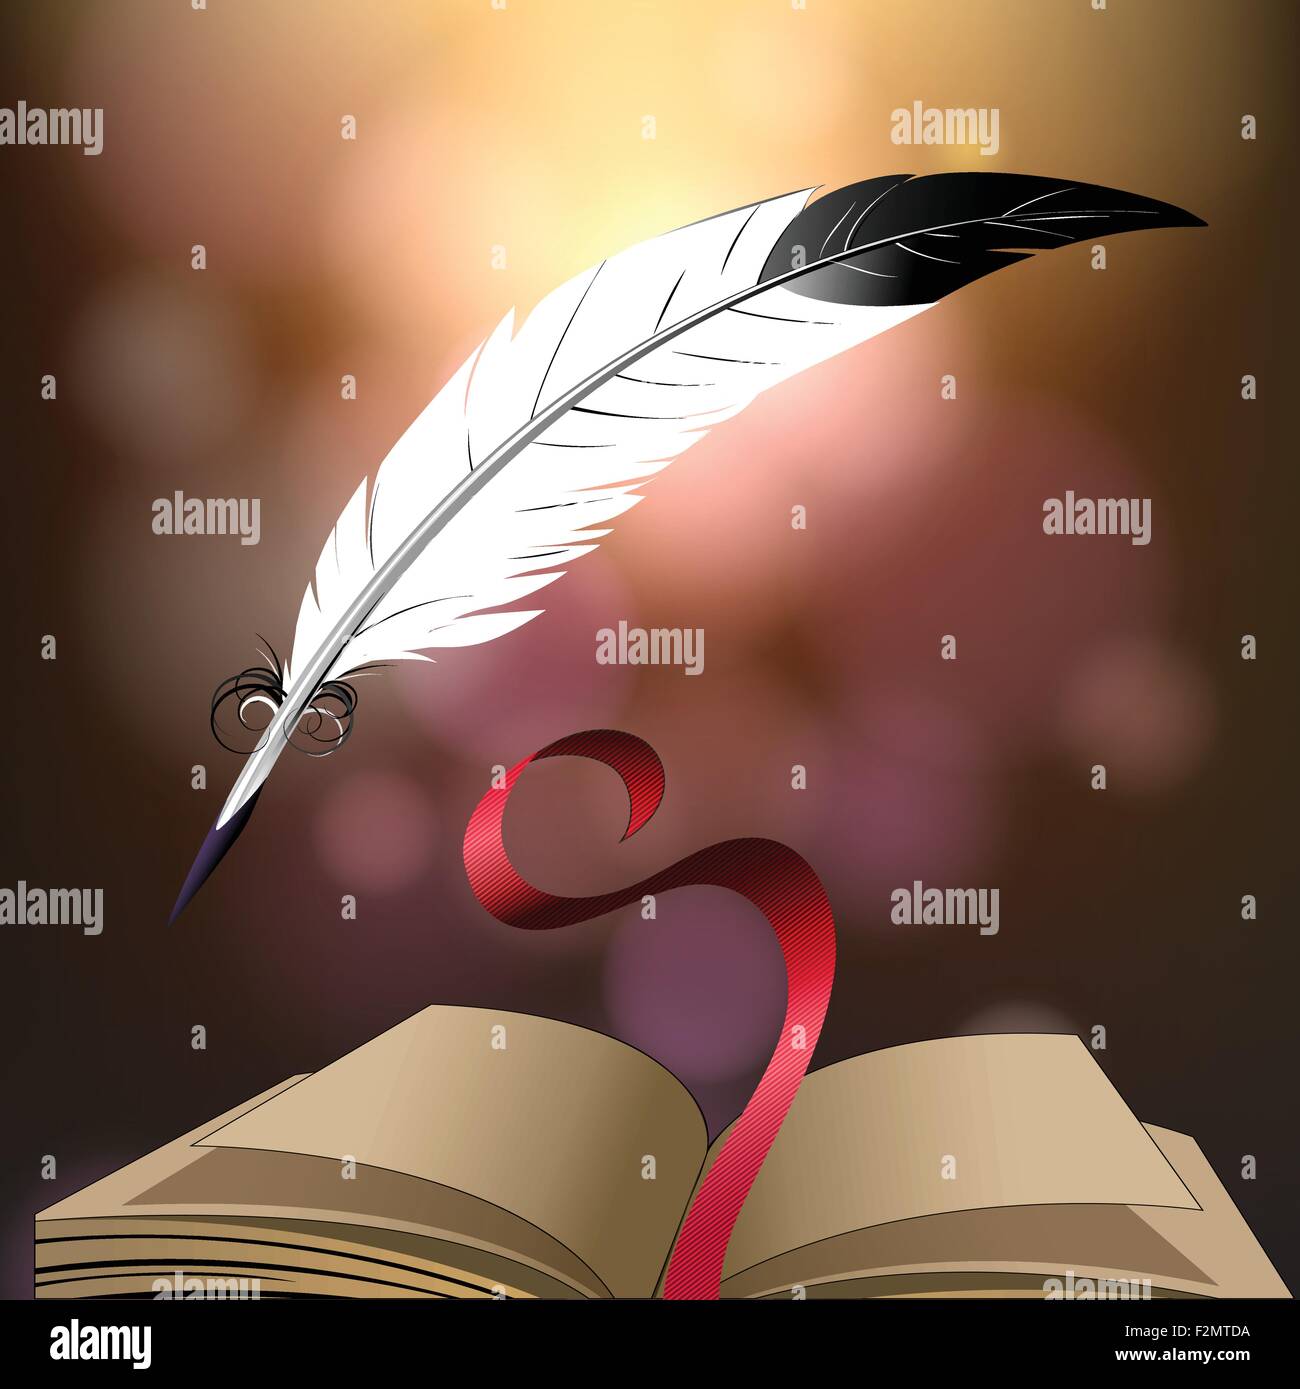 Open book and quill pen against fantasy background. Colorful illustration. Stock Vector